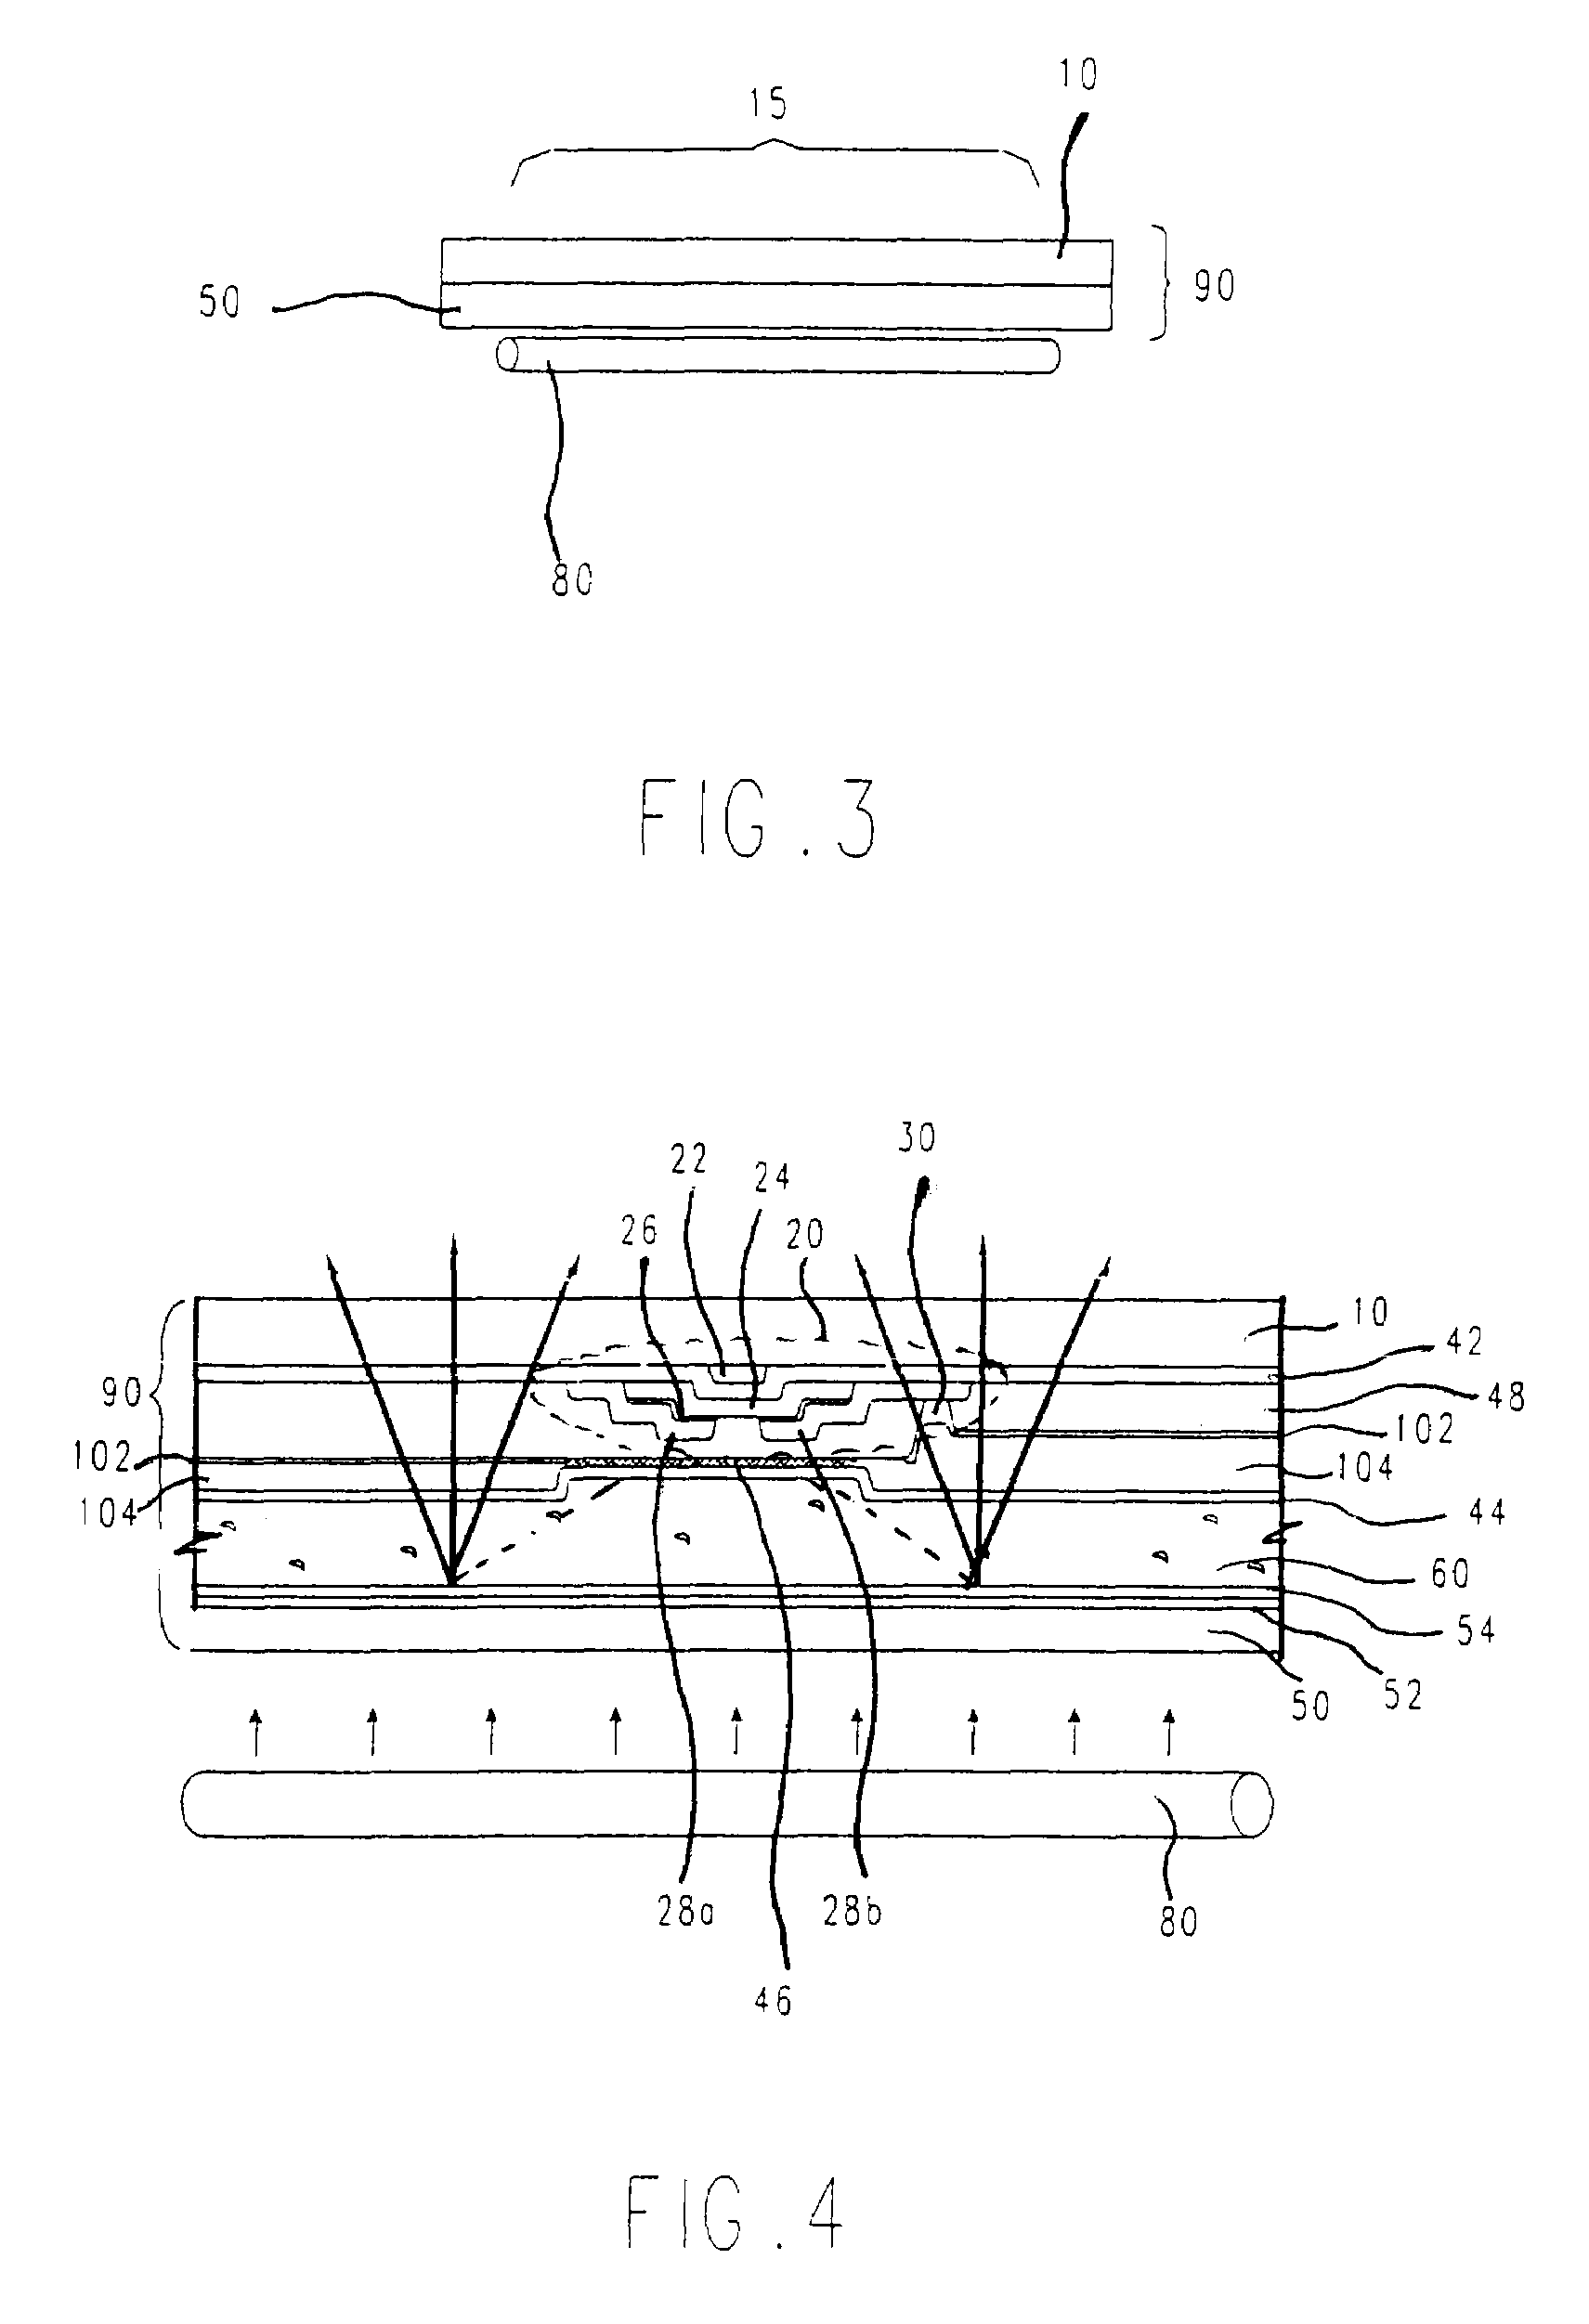 Liquid crystal display device with light absorbing layers